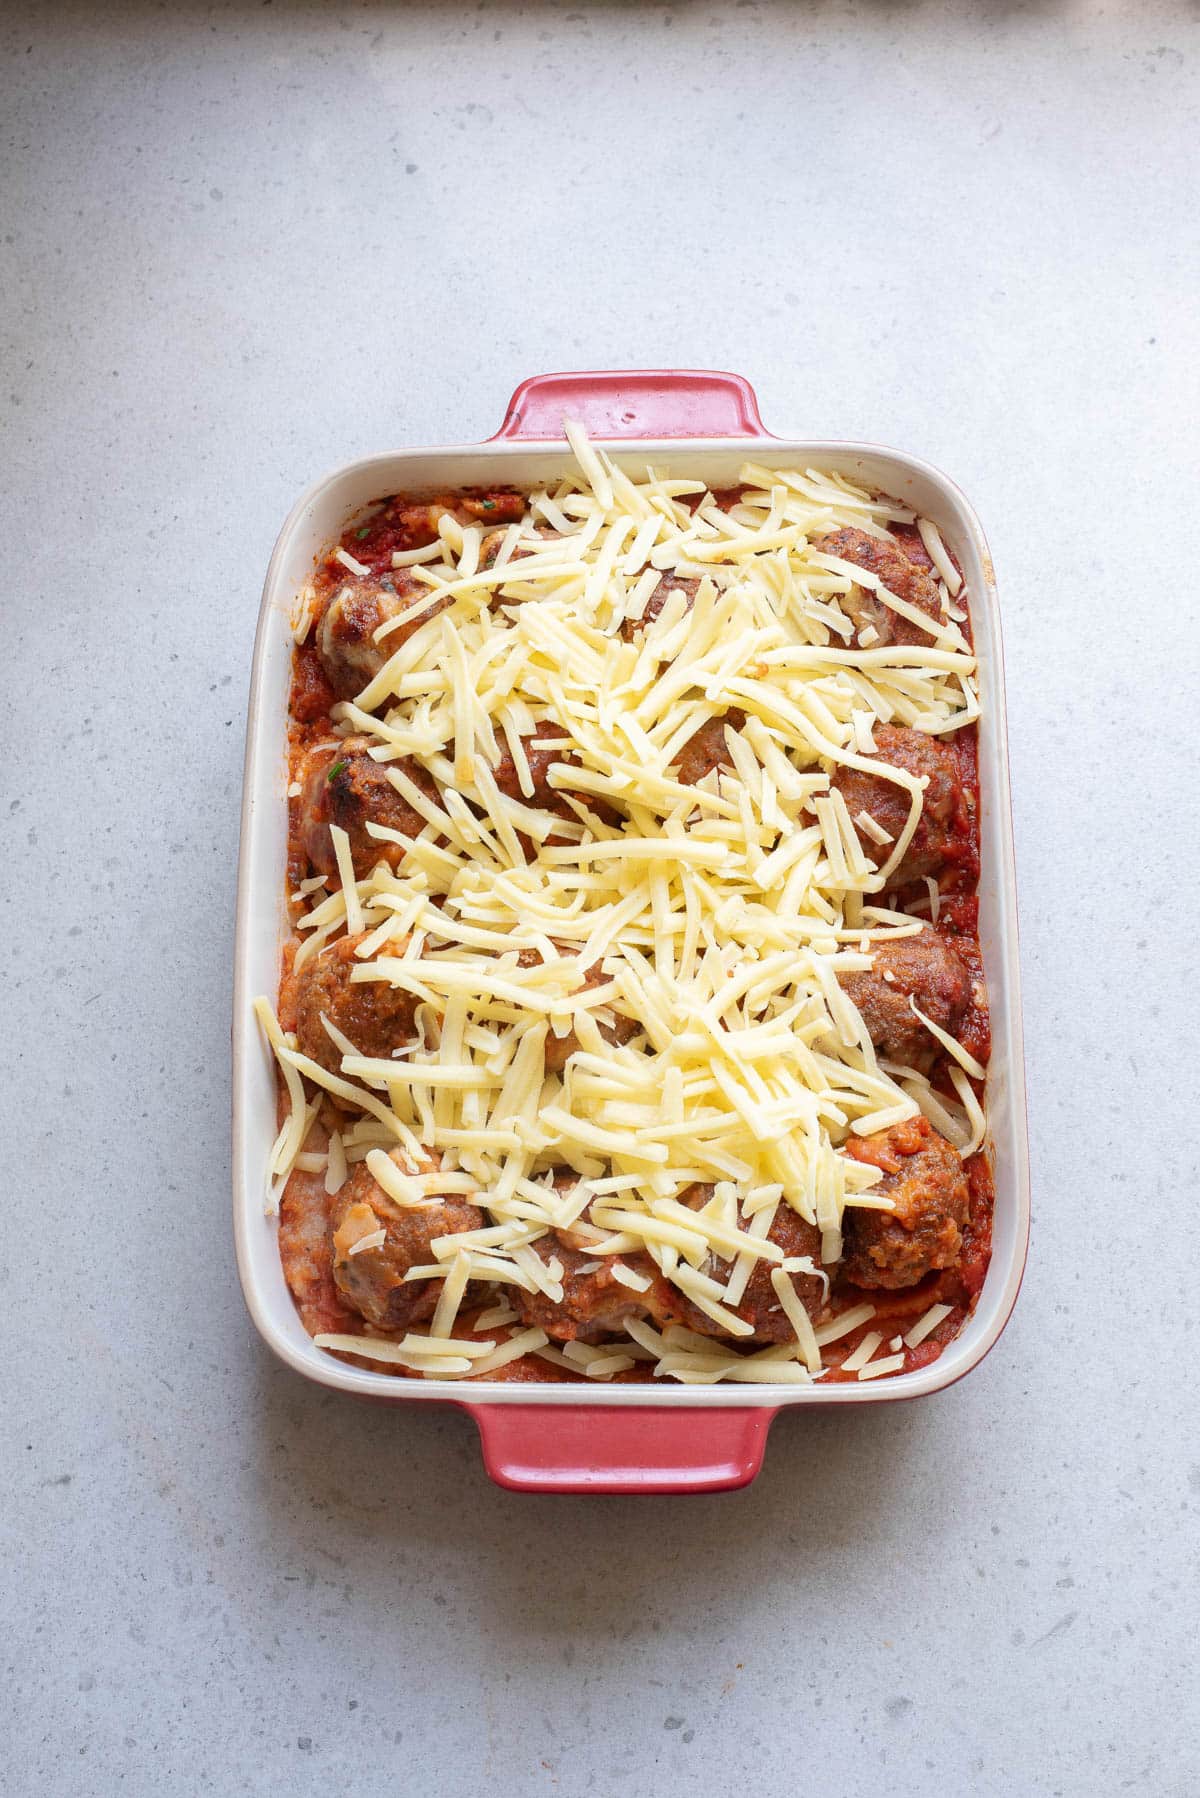 Meatballs in marinara and cheese baked in a casserole dish topped with cheese.